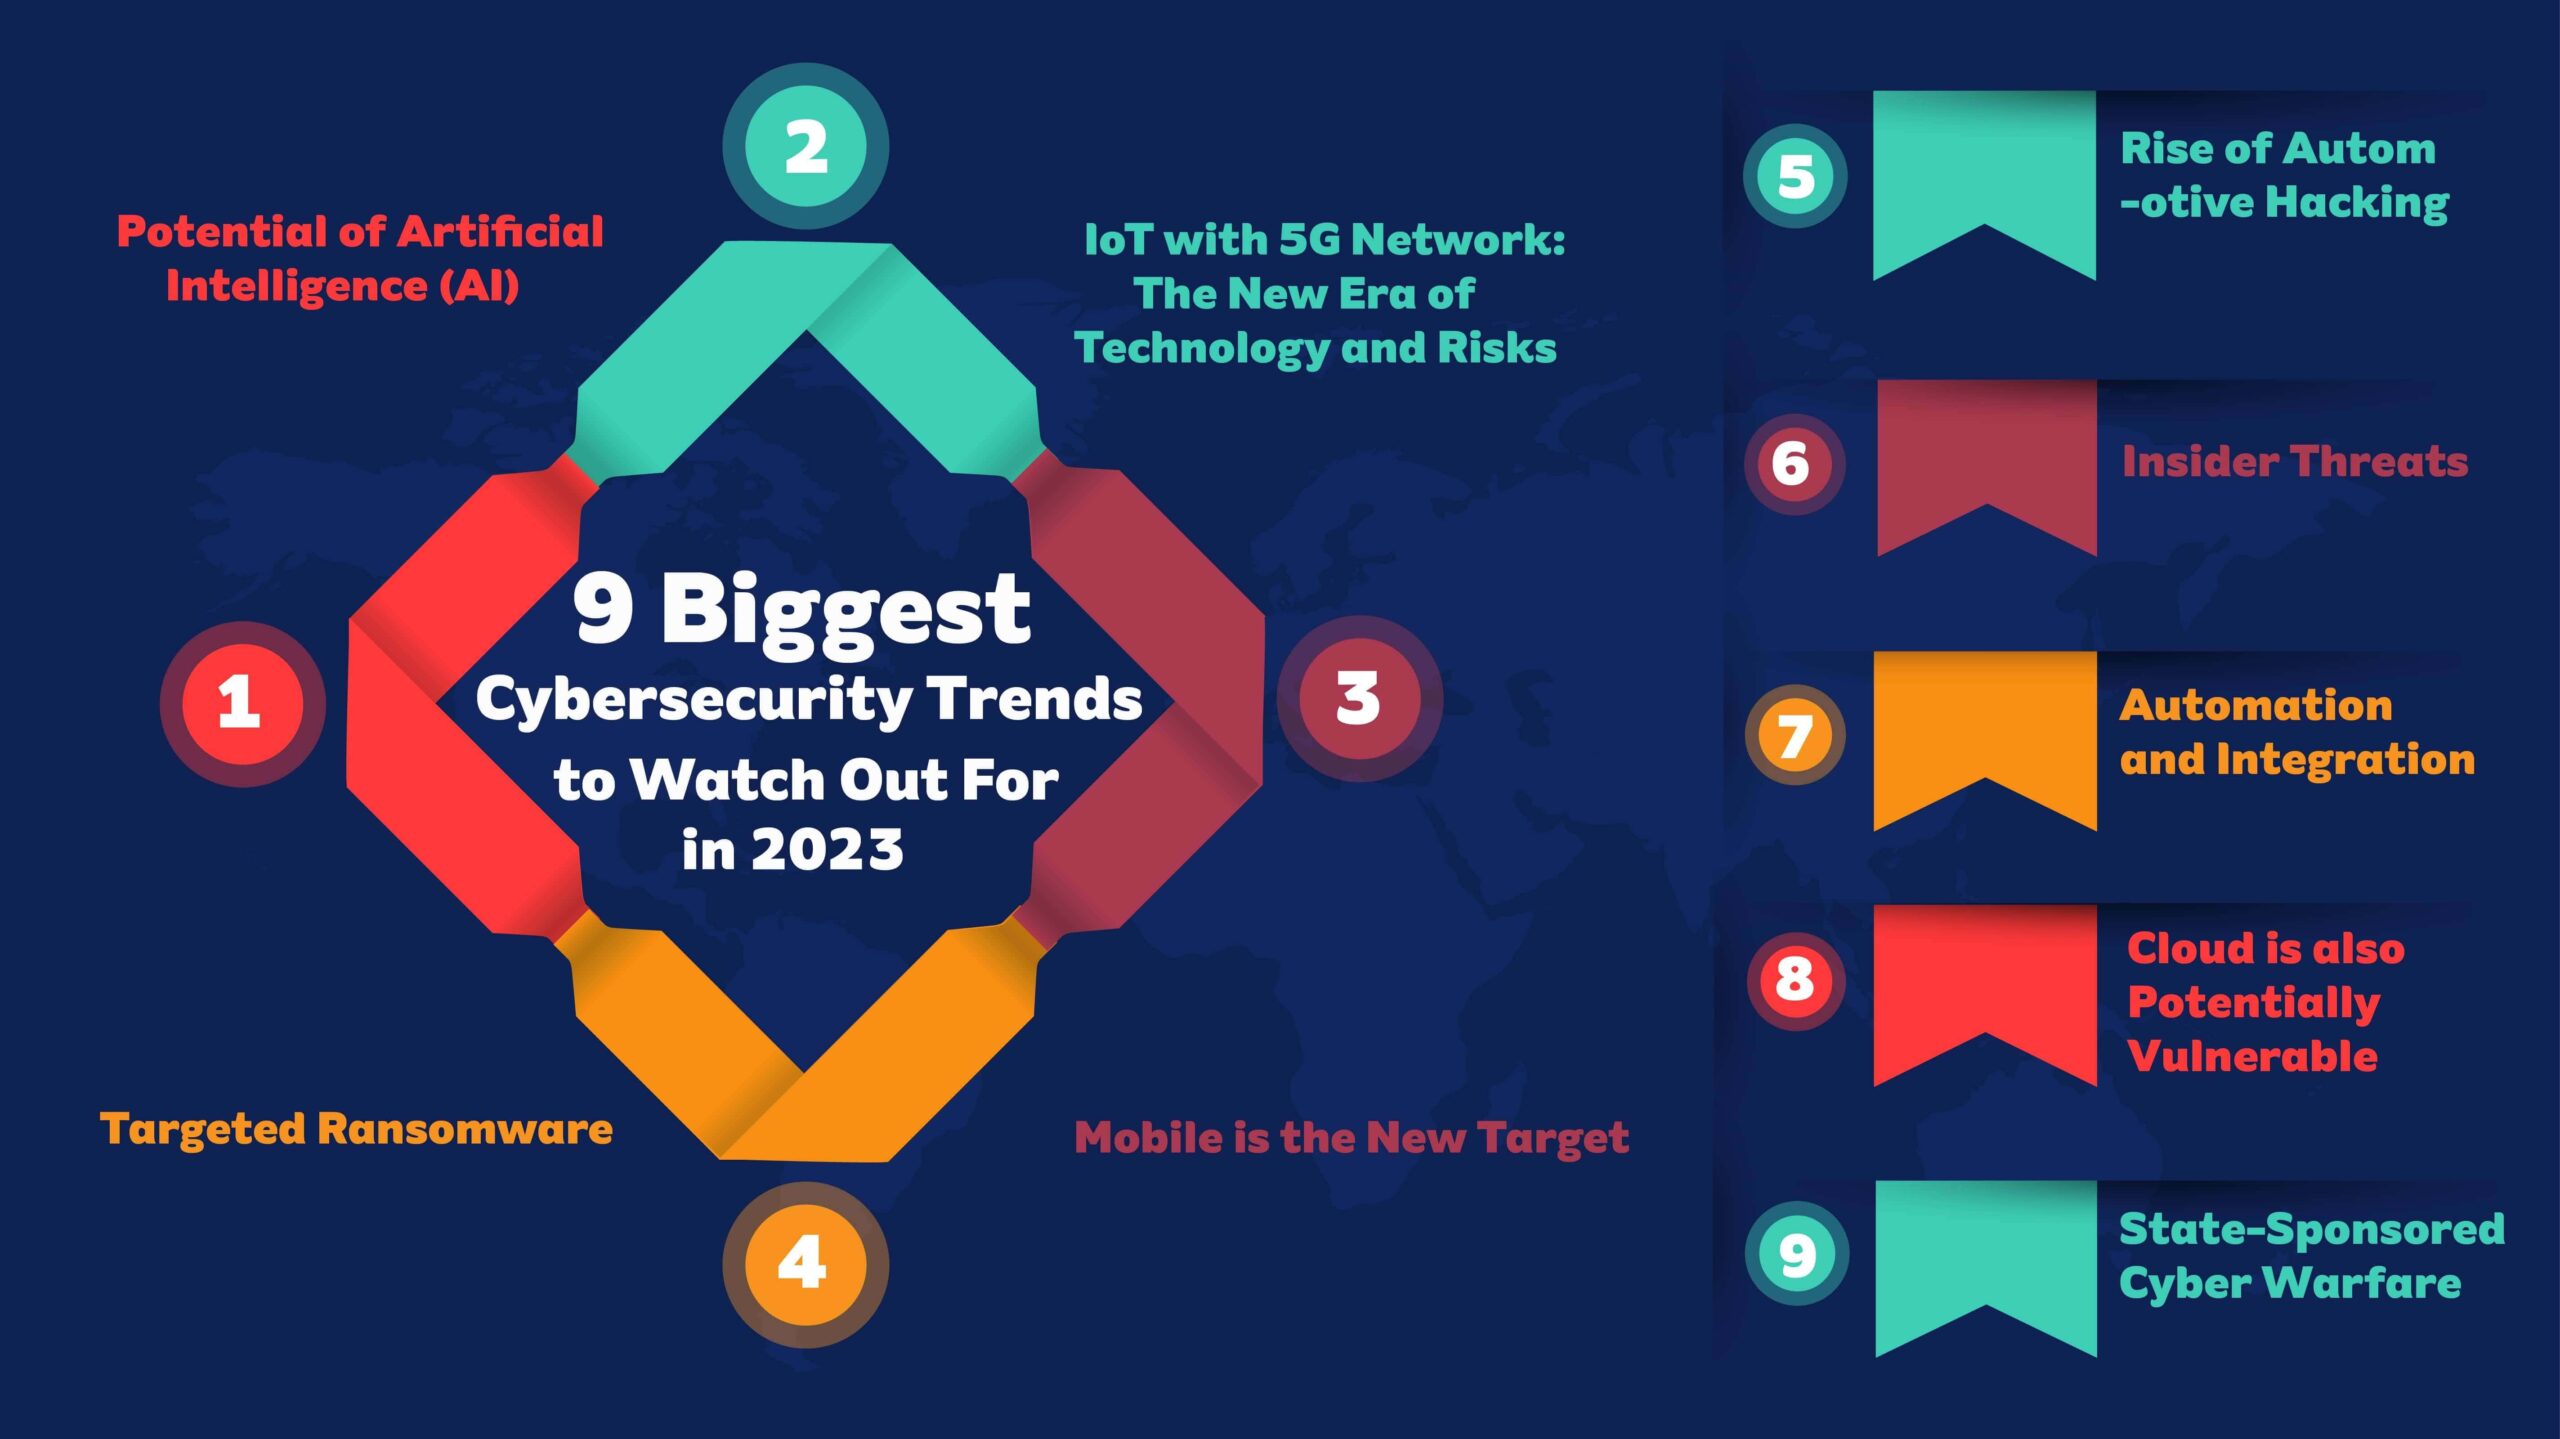 9 Biggest Cybersecurity Trends to Watch Out For in 2023